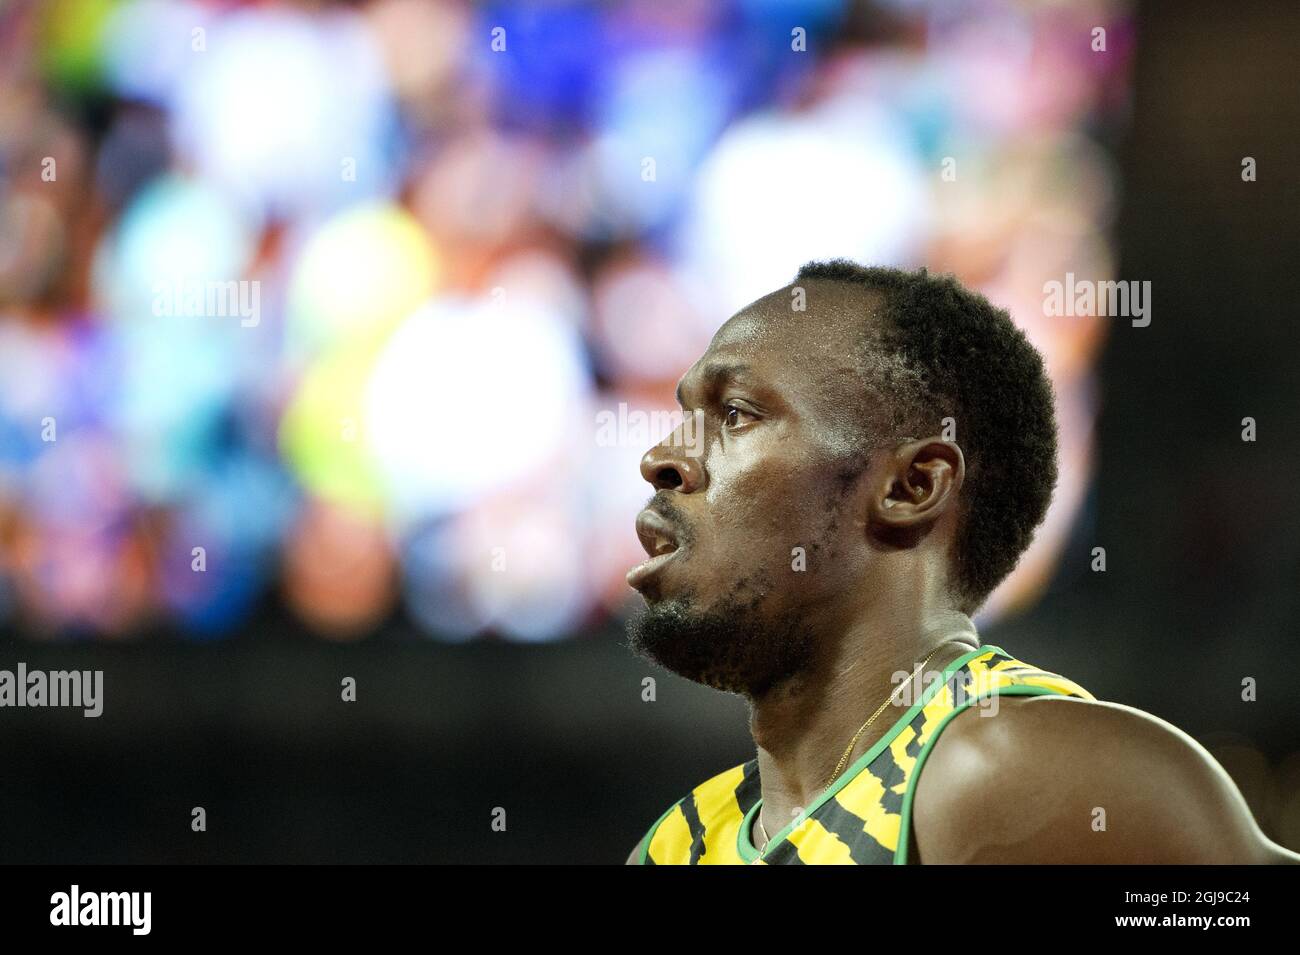 BEIJING 20150823 Usain Bolt of Jamaica after the men's 100 metres semi-final at the Beijing 2015 IAAF World Championships at the National Stadium in Beijing, China, August 23, 2015. Photo: Jessica Gow / TT / Kod 10070  Stock Photo